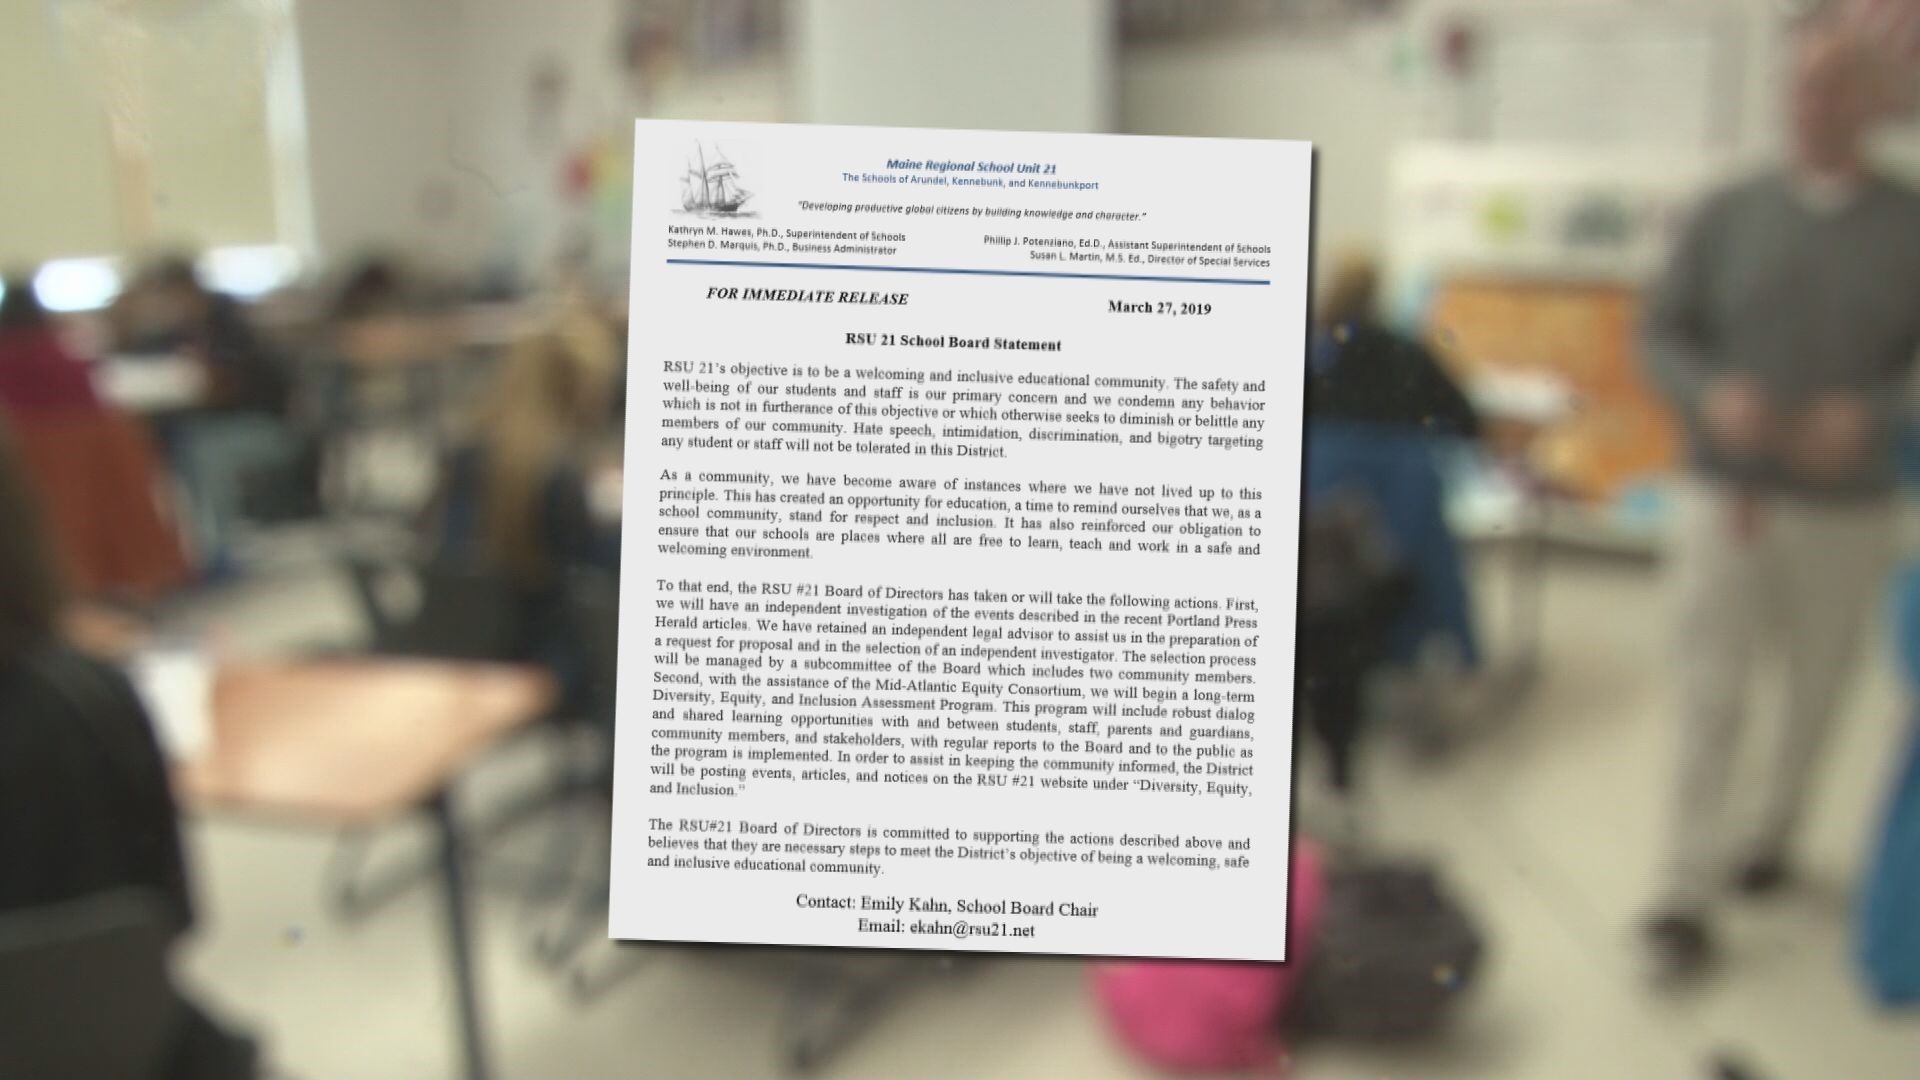 The detailed statement released Thursday by the school board say they plan to investigate claims of racism at Kennebunk High School made to Portland Press Herald in February.